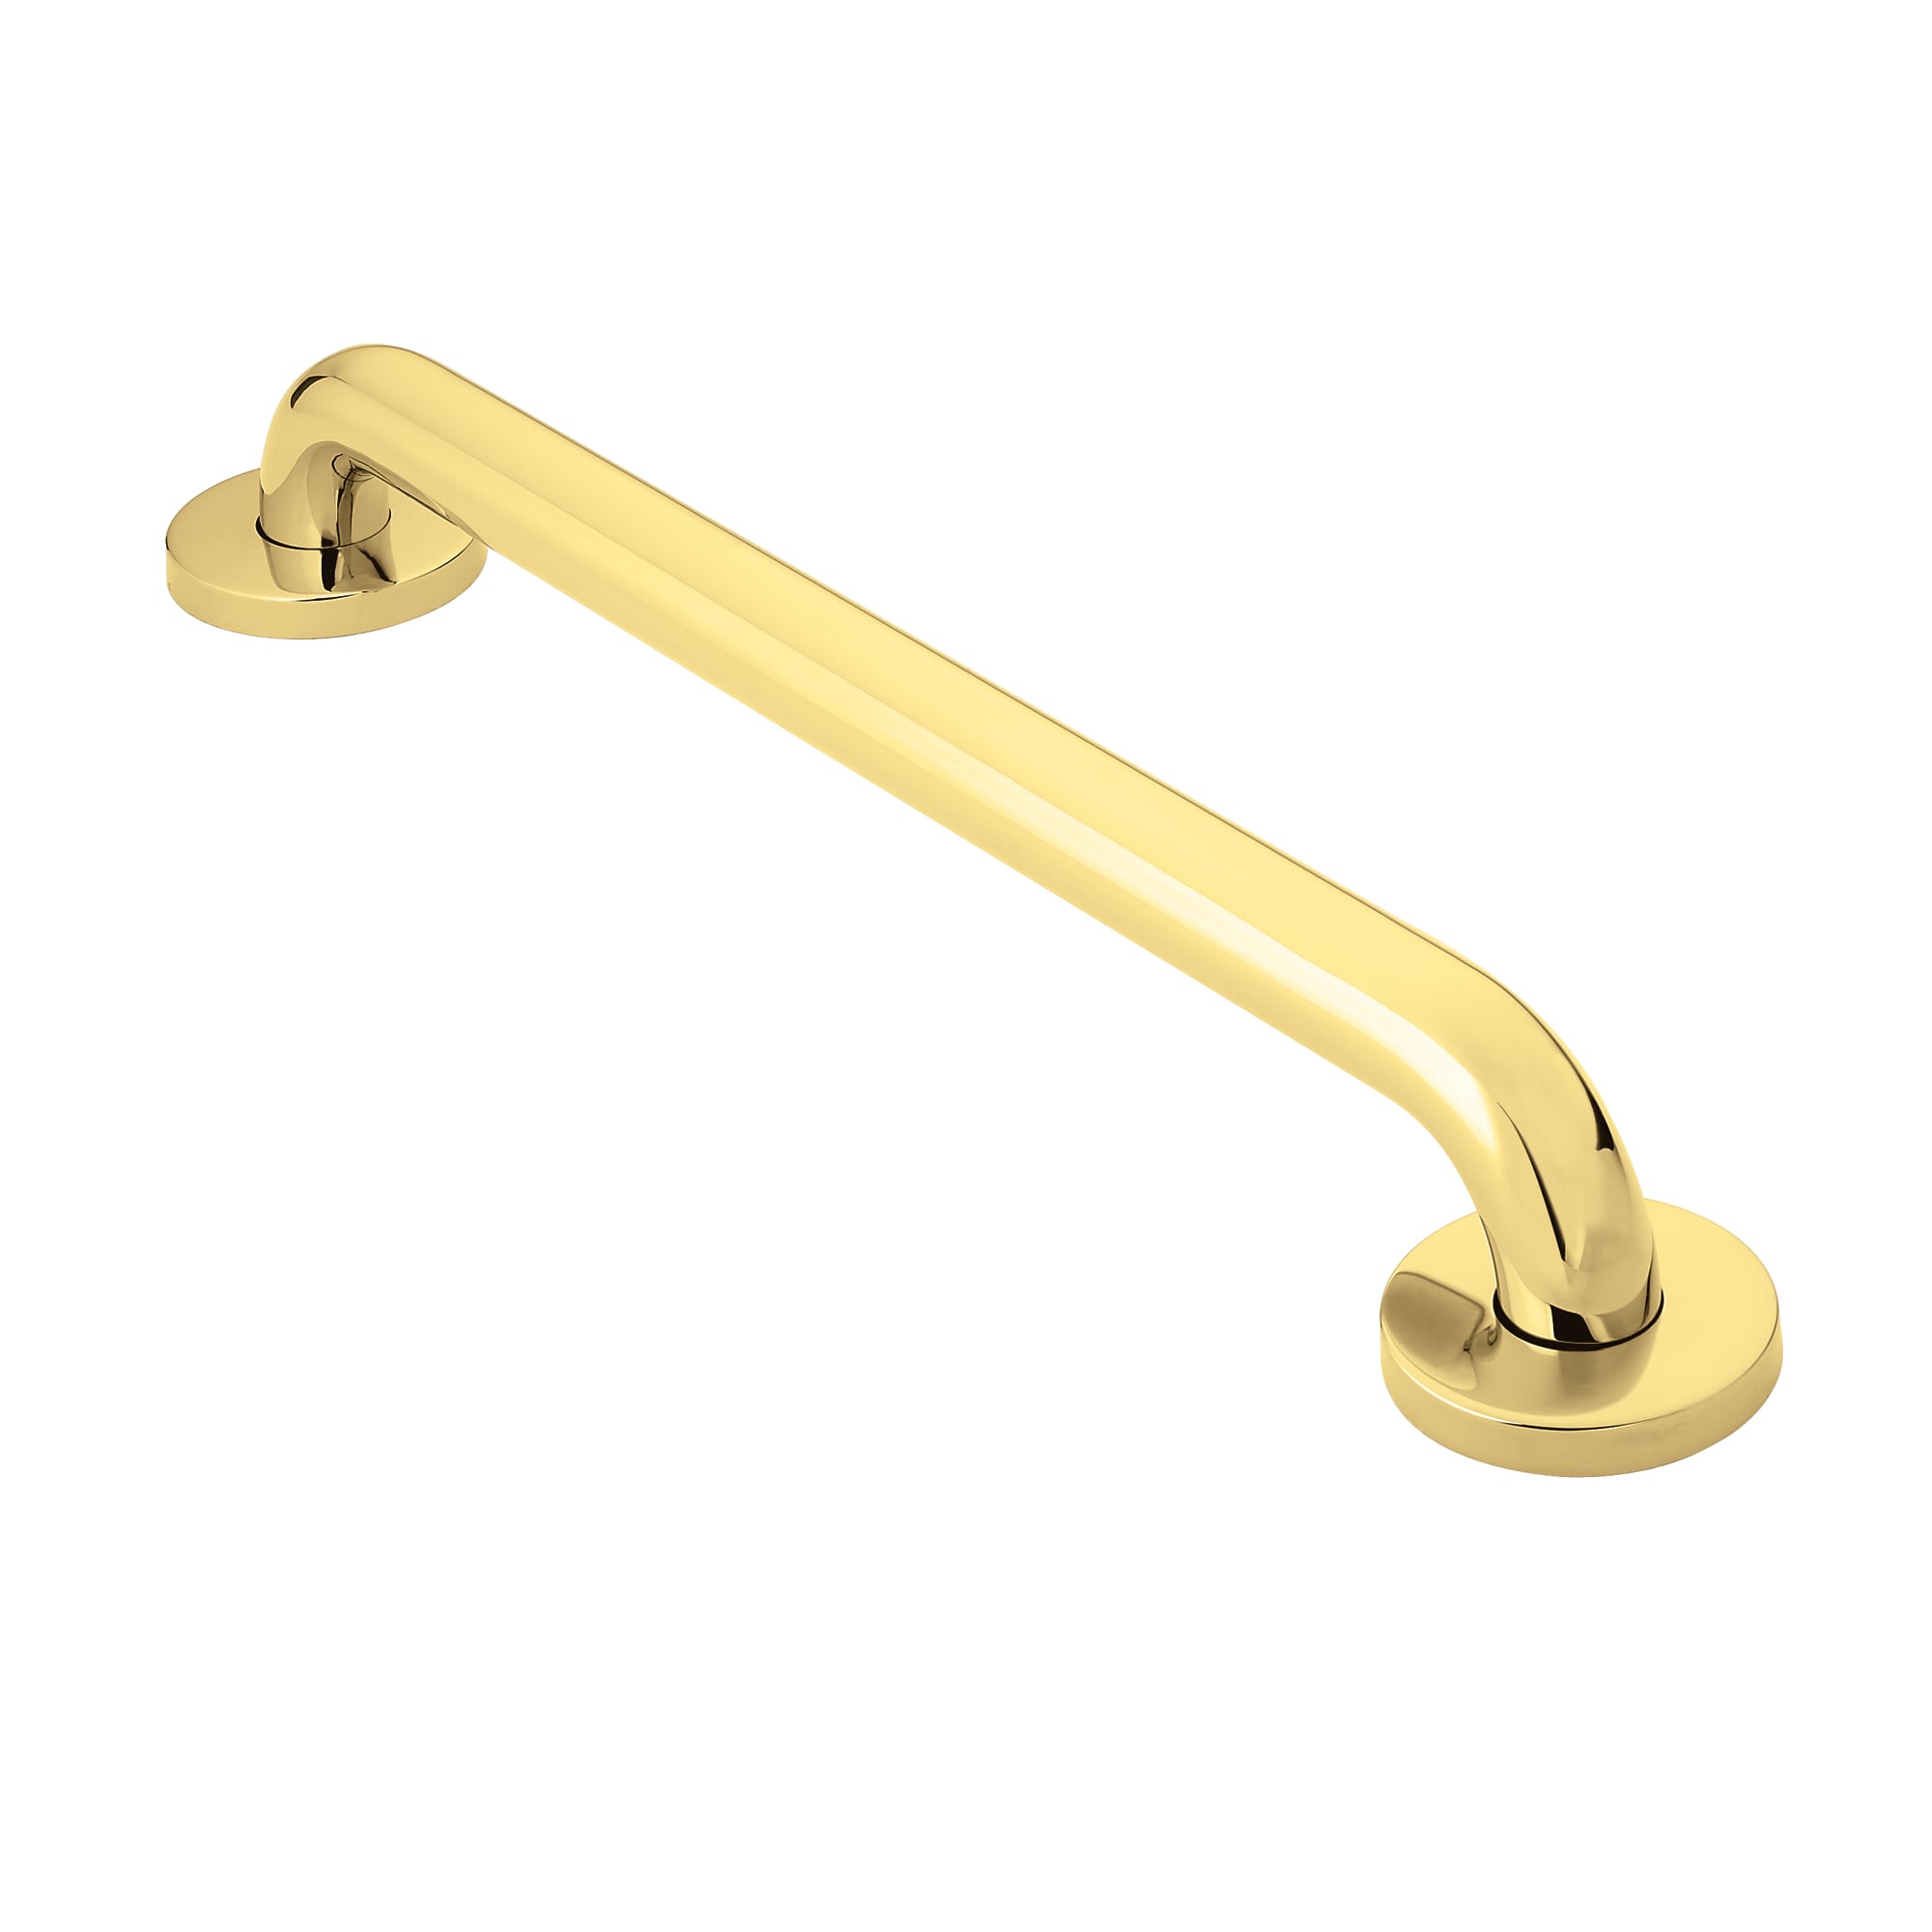 Moen Moen Home Care 18-in Polished Brass Wall Mount ADA Compliant Grab Bar (500-lb Weight Capacity)